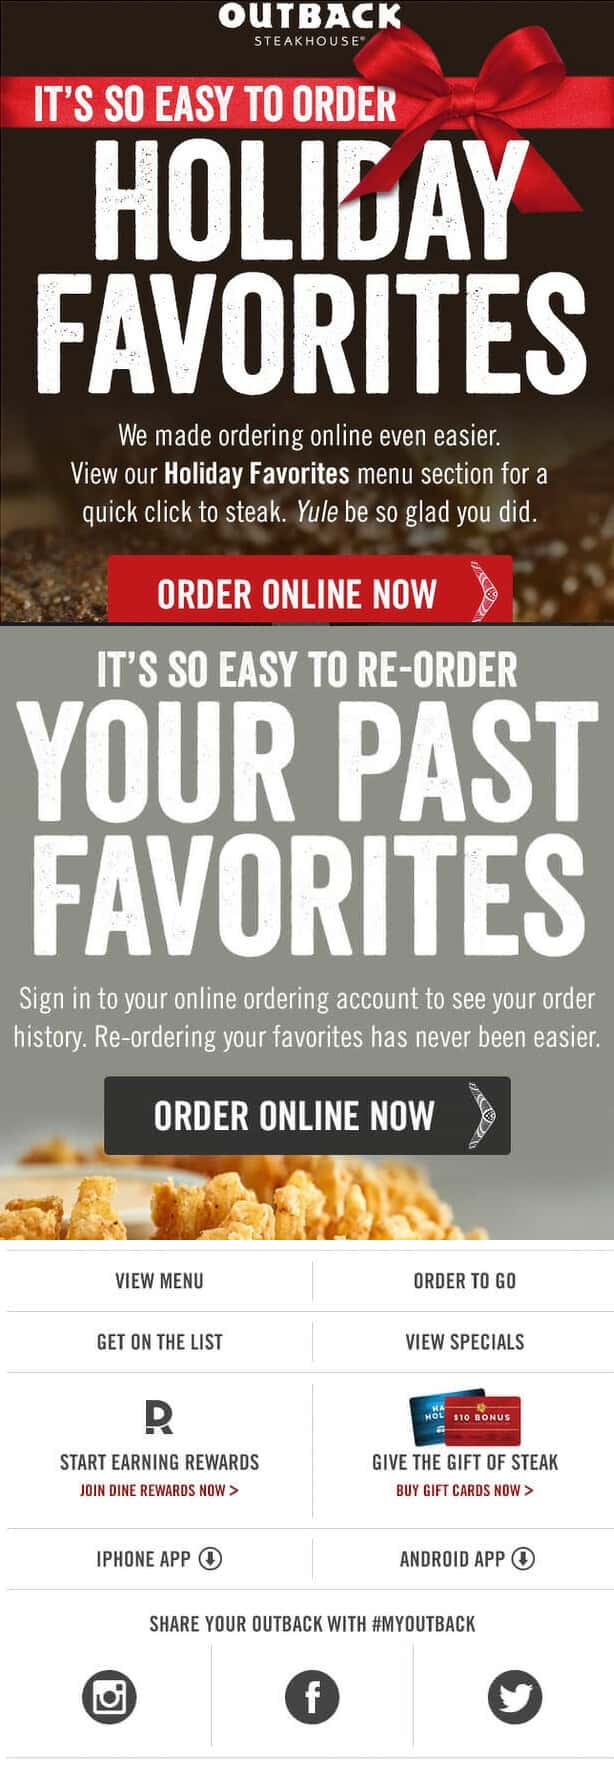 Outback Steakhouse email example clear sections & practical information added